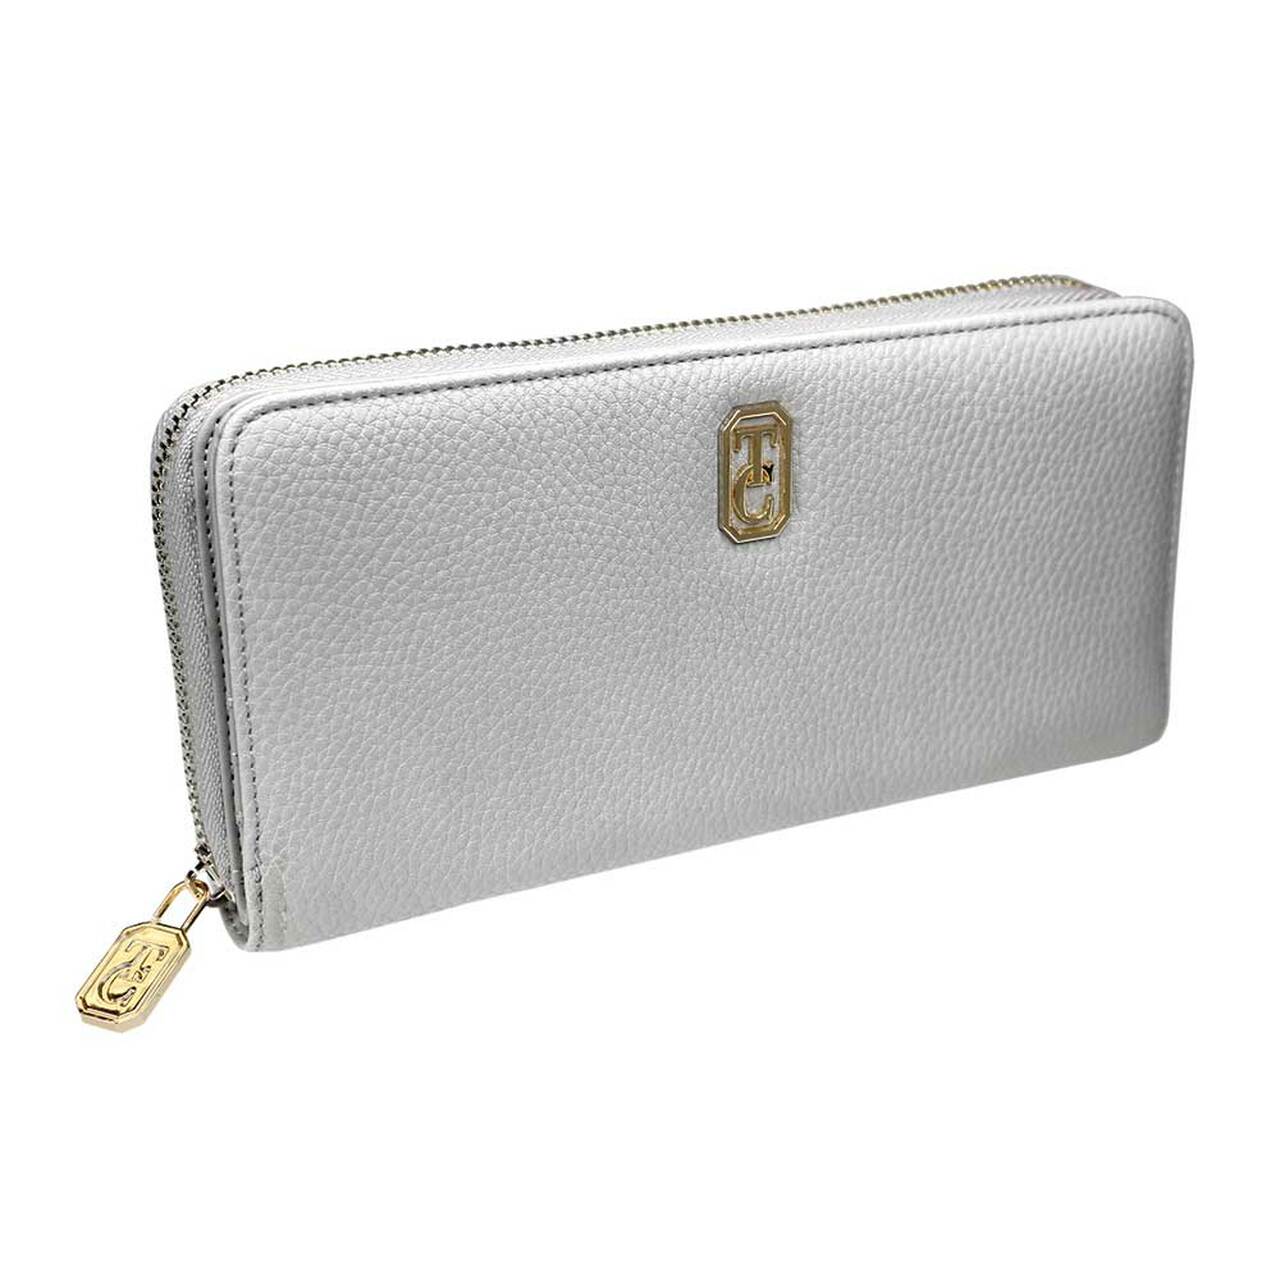 Tipperary Crystal Wallet-Umbria-Grey